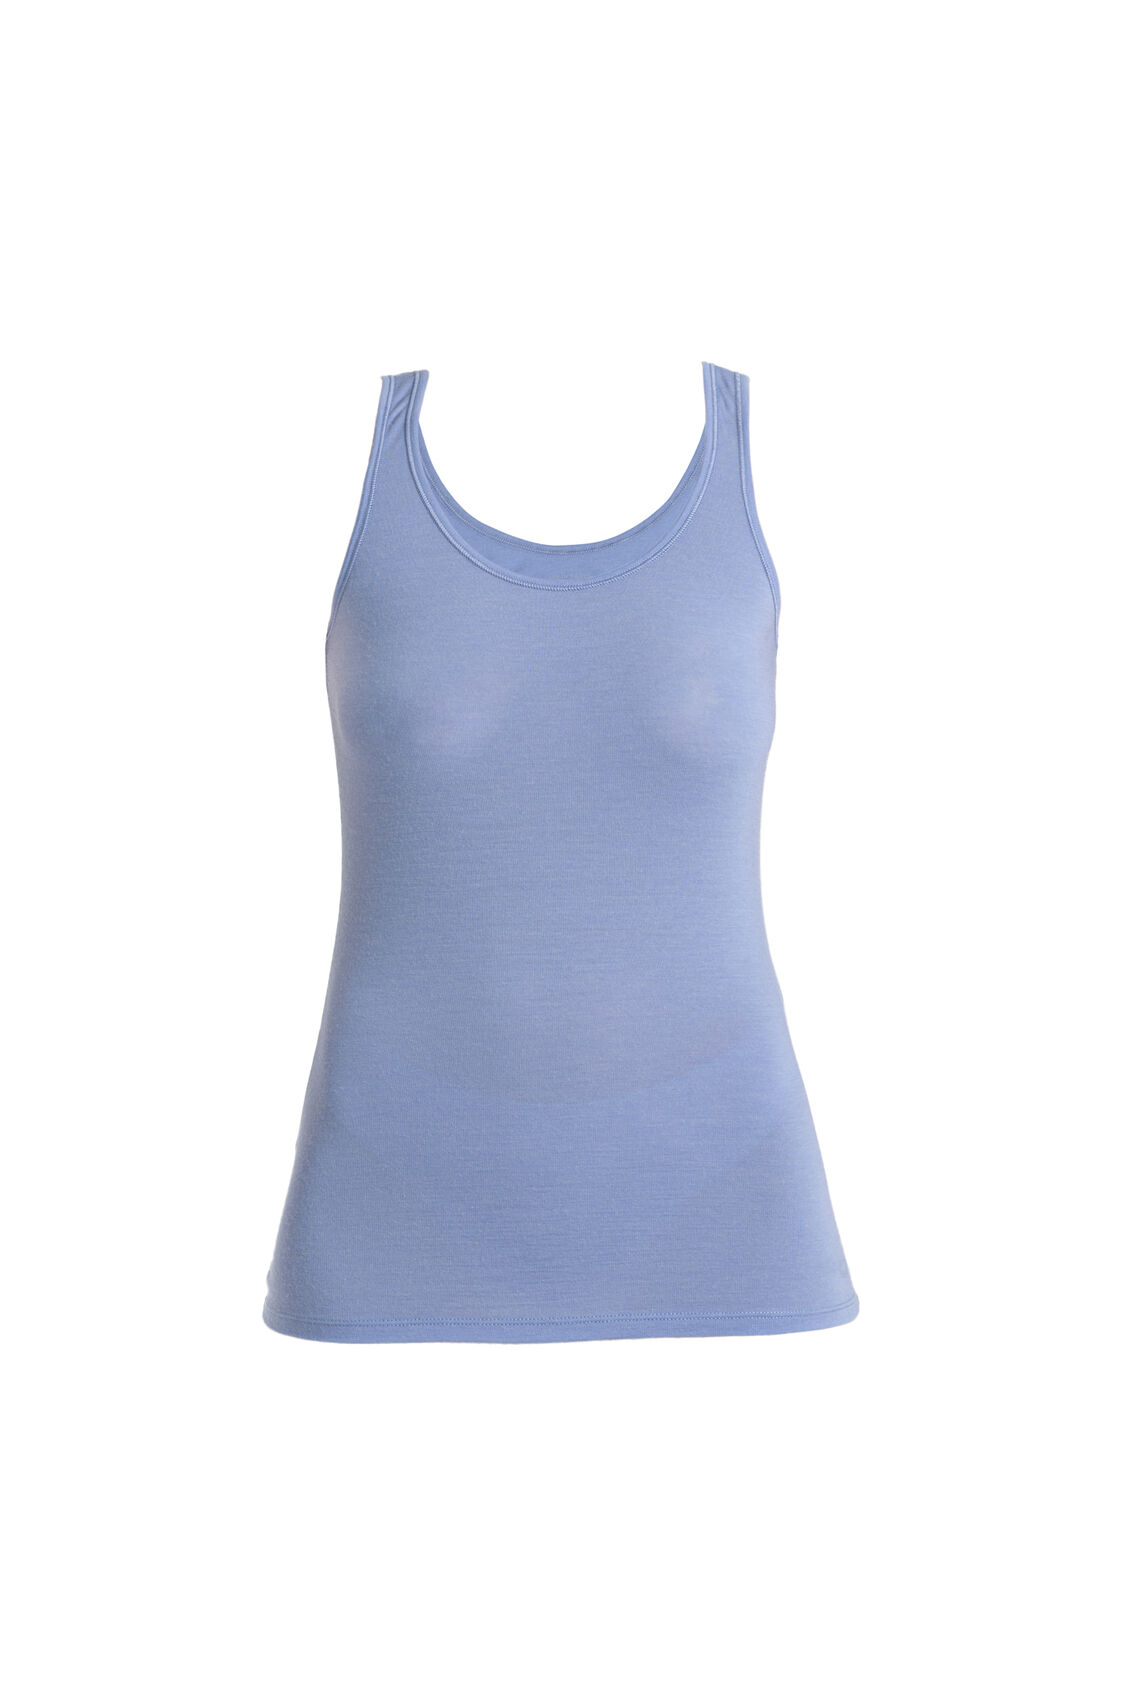 Buy Jairy Shop Thermal Wear Set for Women, Keeps Body Warm, Stretchable  Thermal S Blue at